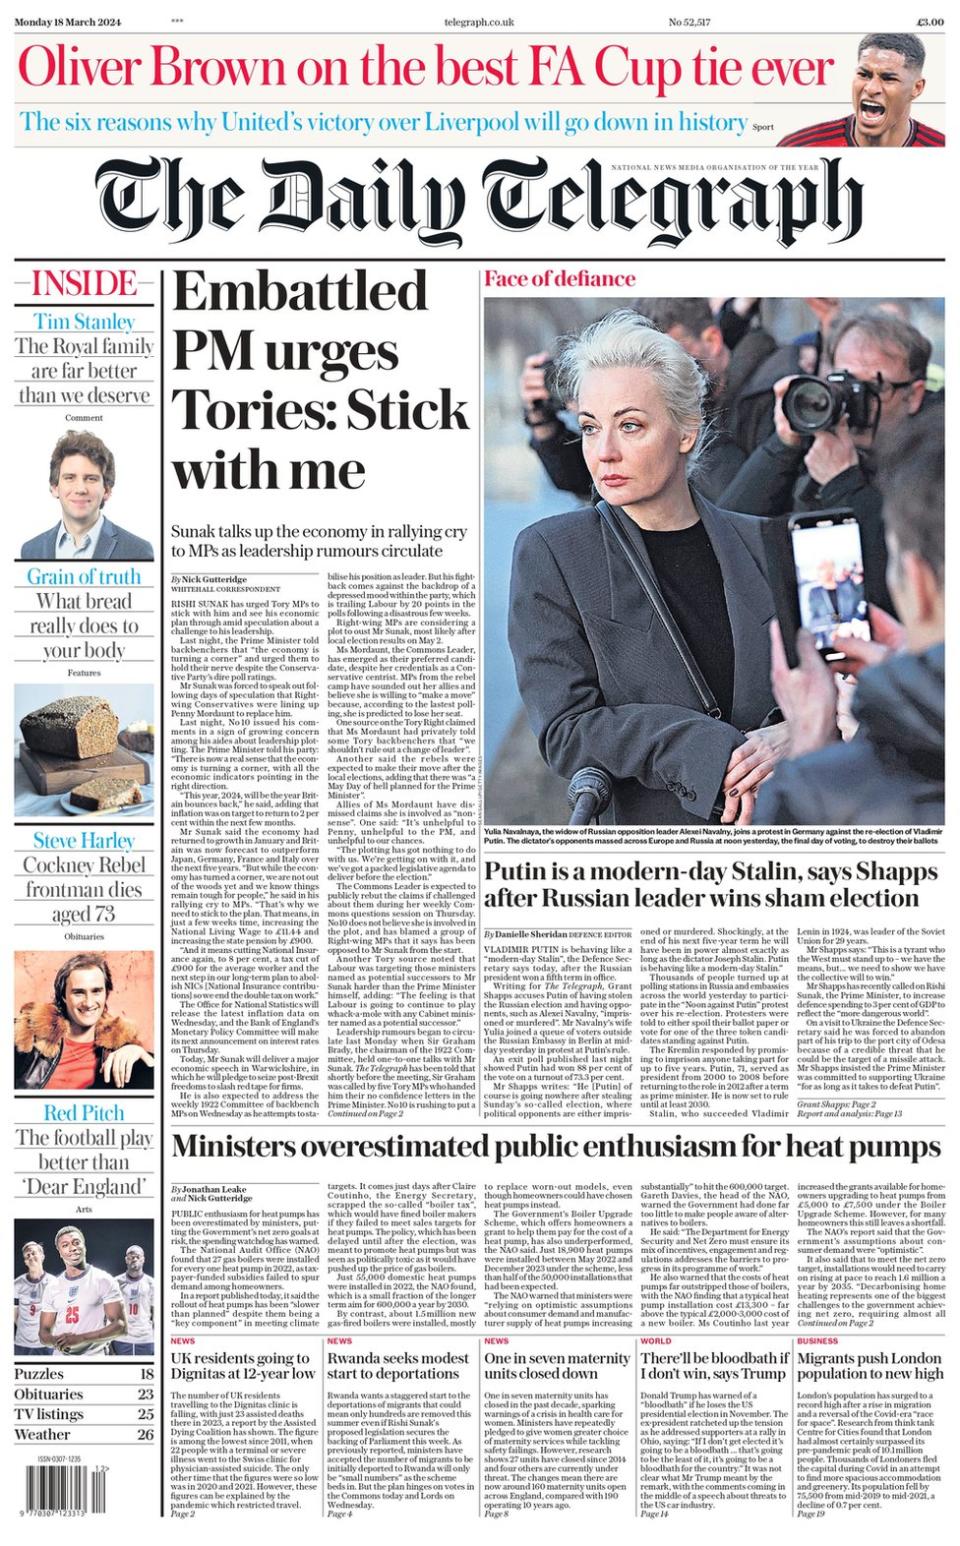 Daily Telegraph: Embattled PM urges Tories to stick with me